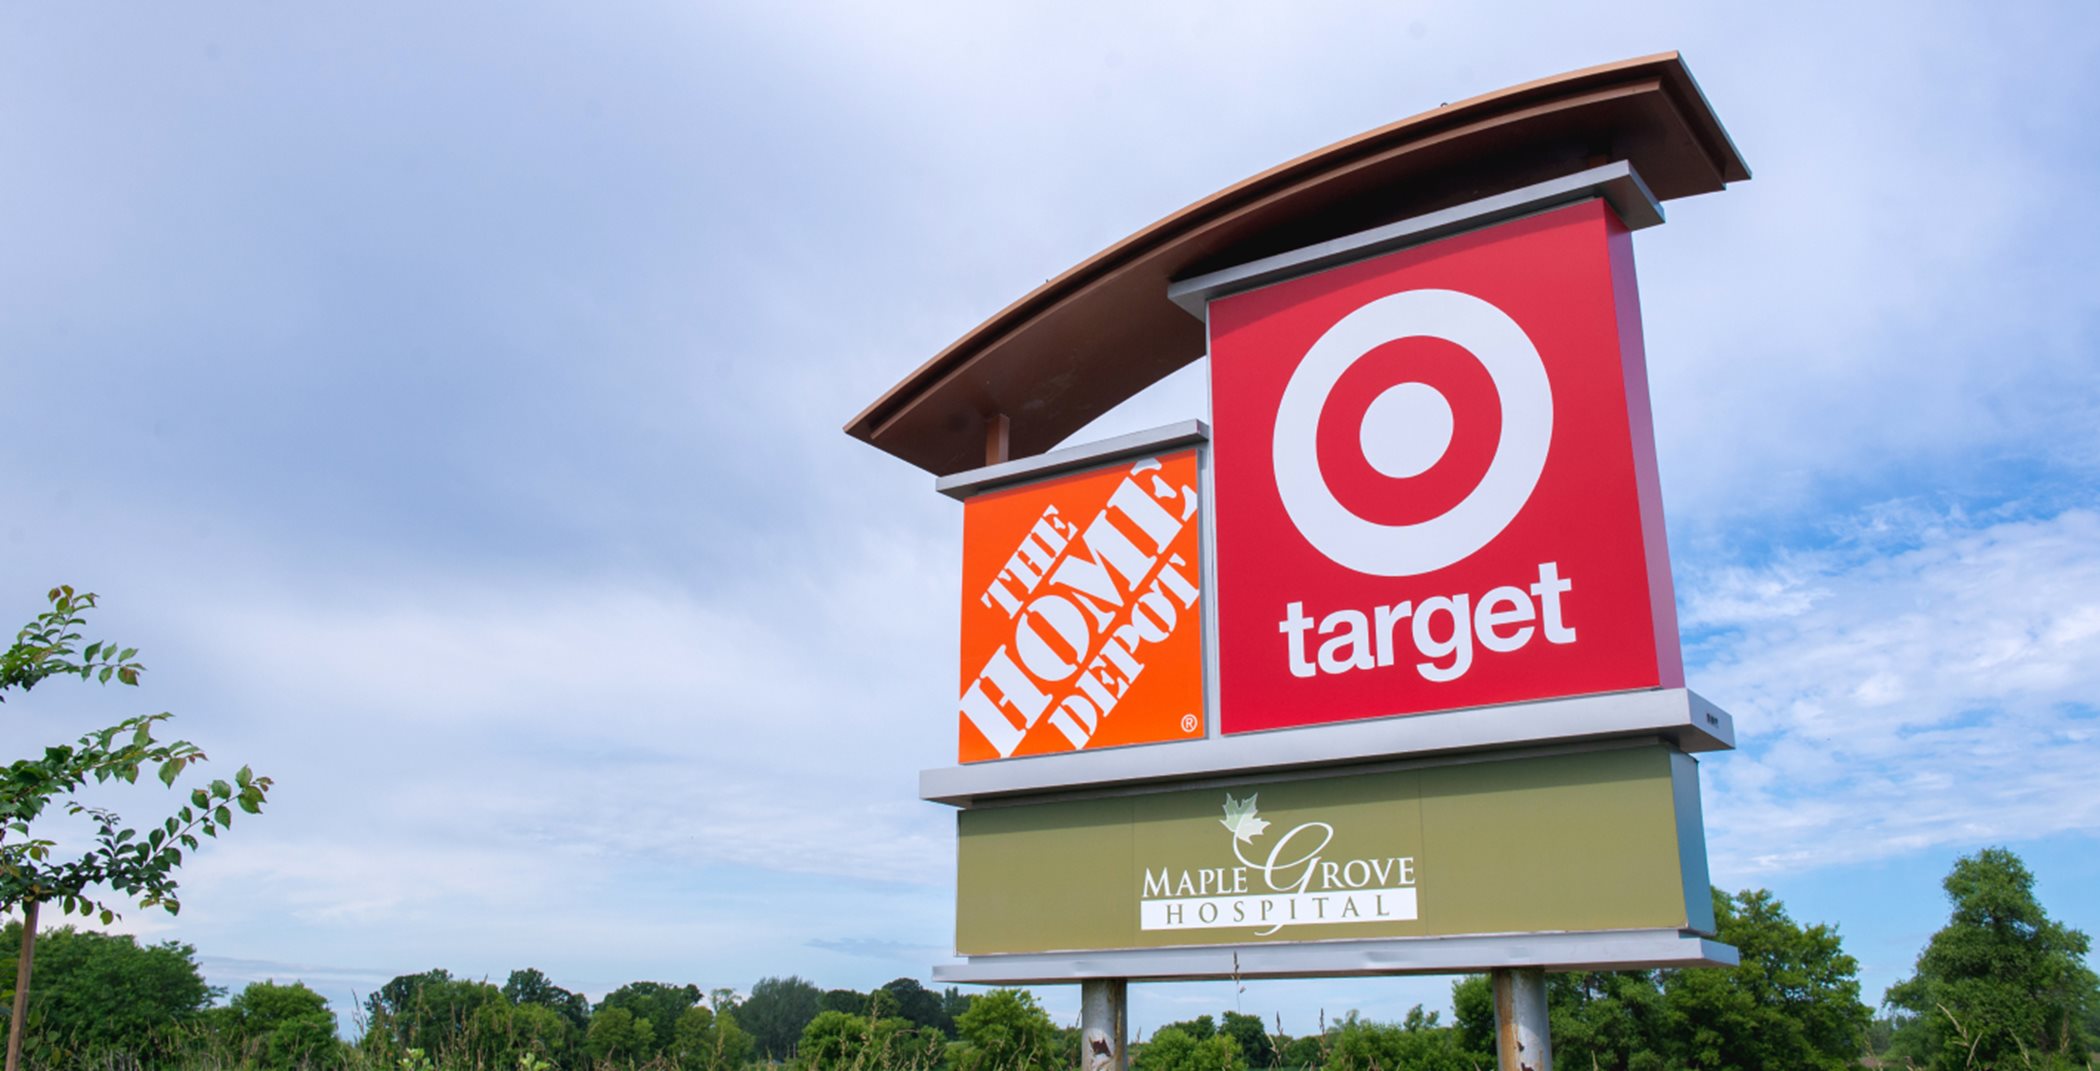 Maple Grove Hospital and Home Depot and Target